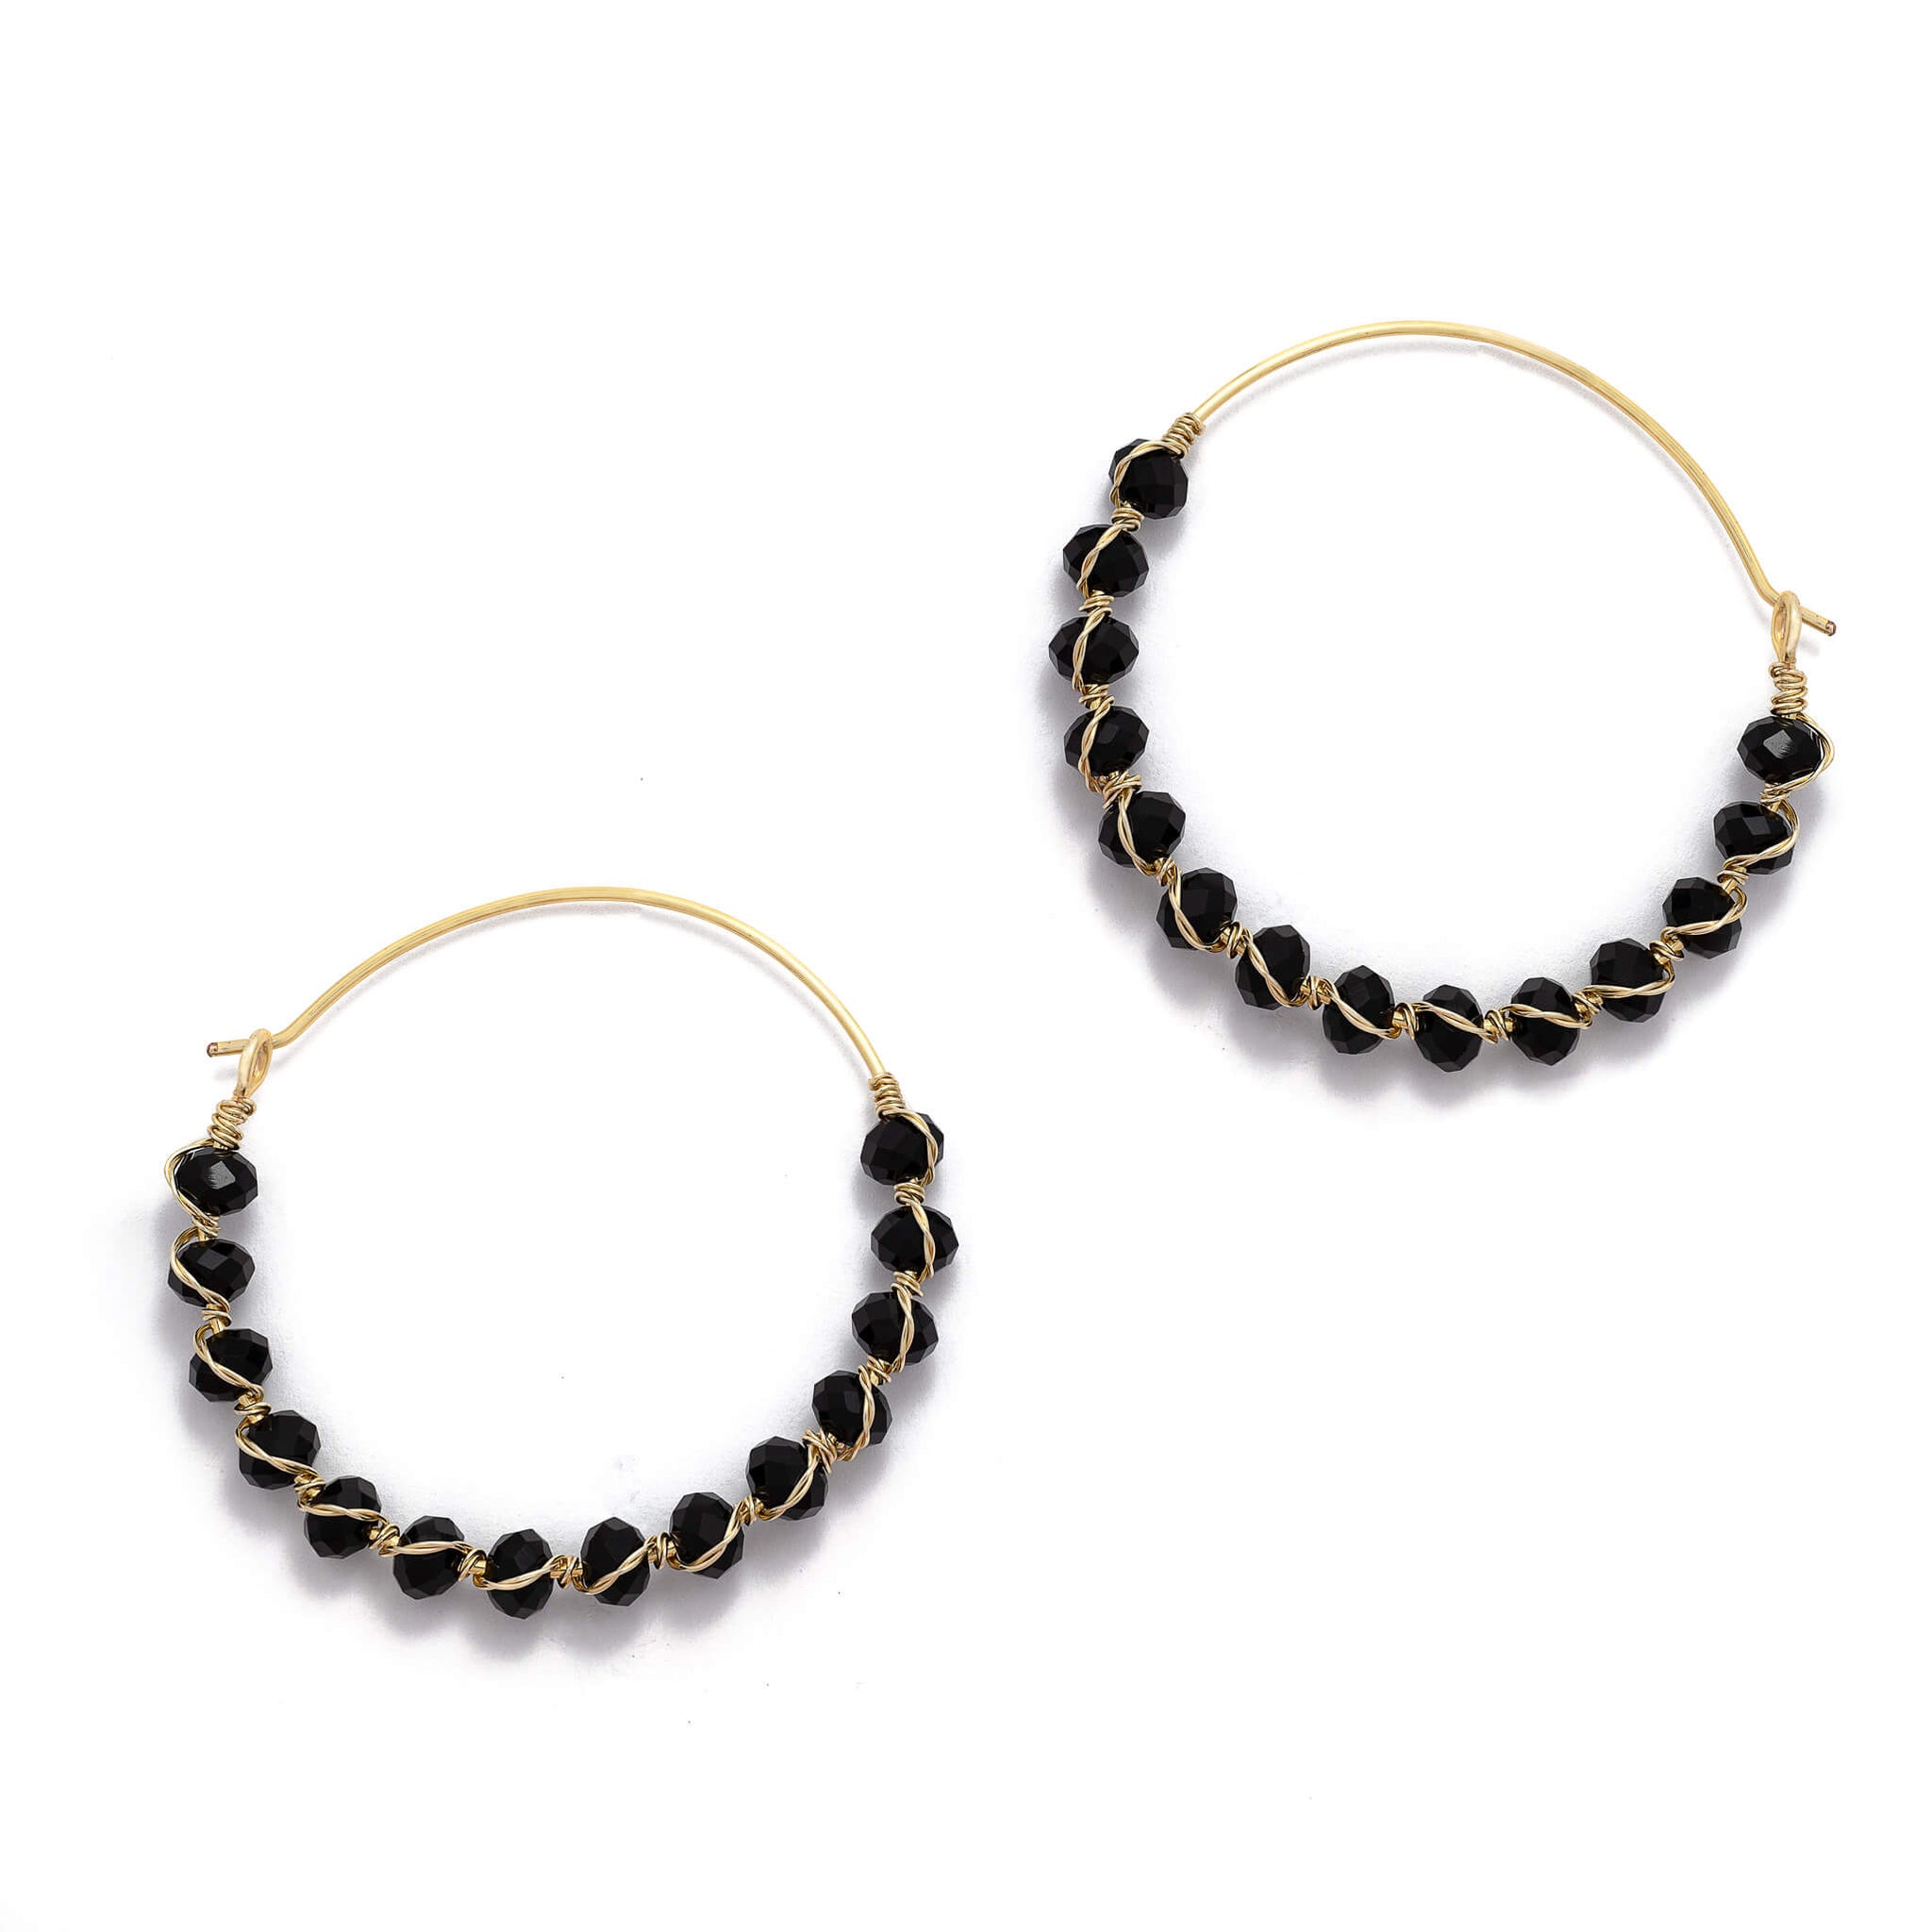 Asti Hoop Earrings are 2 inches long. Gold and Black hoops. Handmade with gold-plated wire and faceted crystals. Beaded round Hoops. Simple Wire Wrapped Earrings.